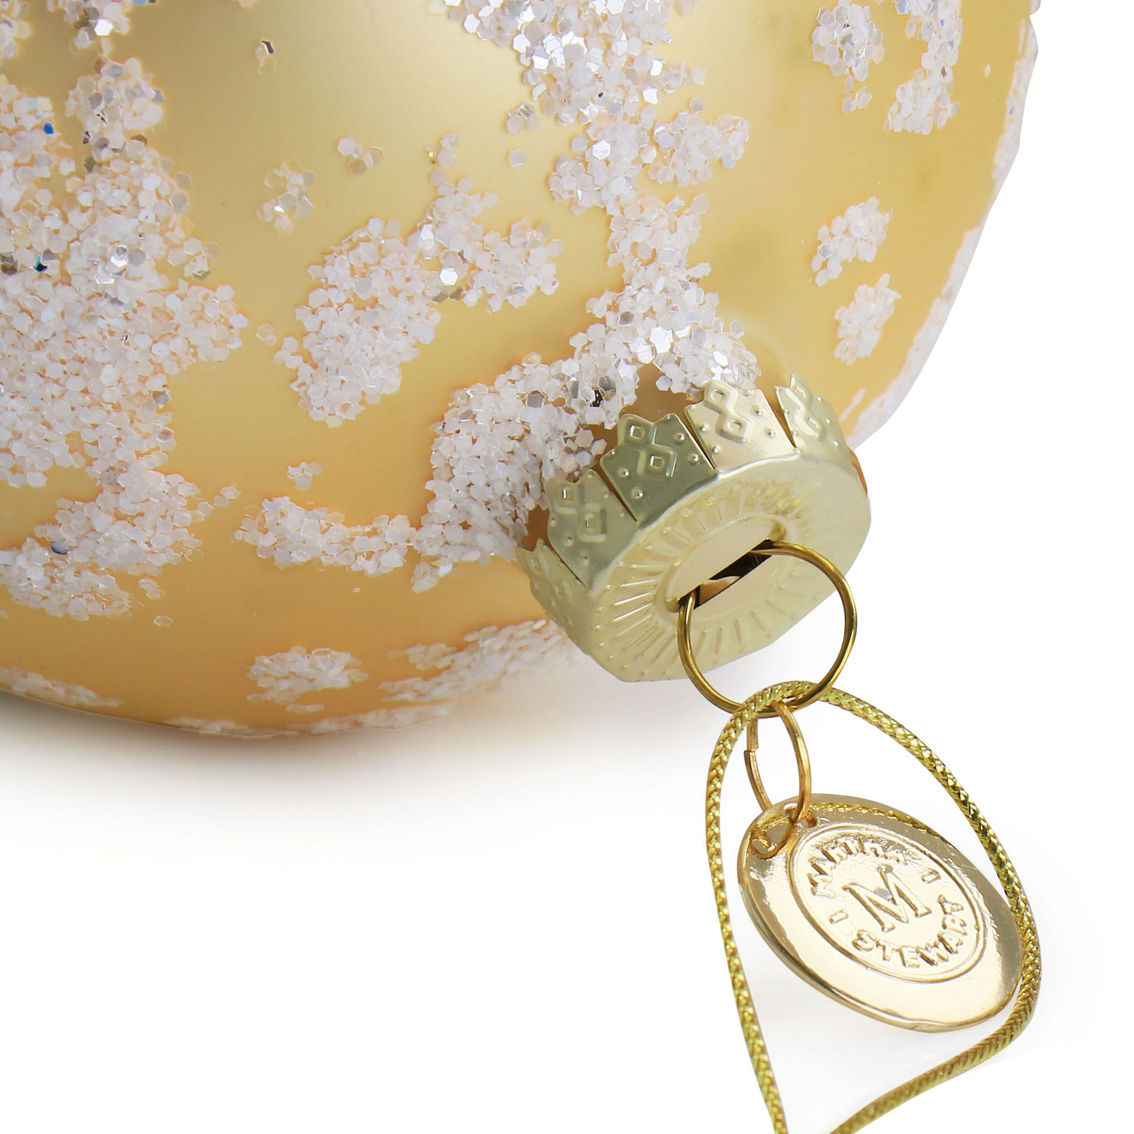 Martha Stewart Holiday Ball Ornament 4 Piece Set in Gold - Image 3 of 5